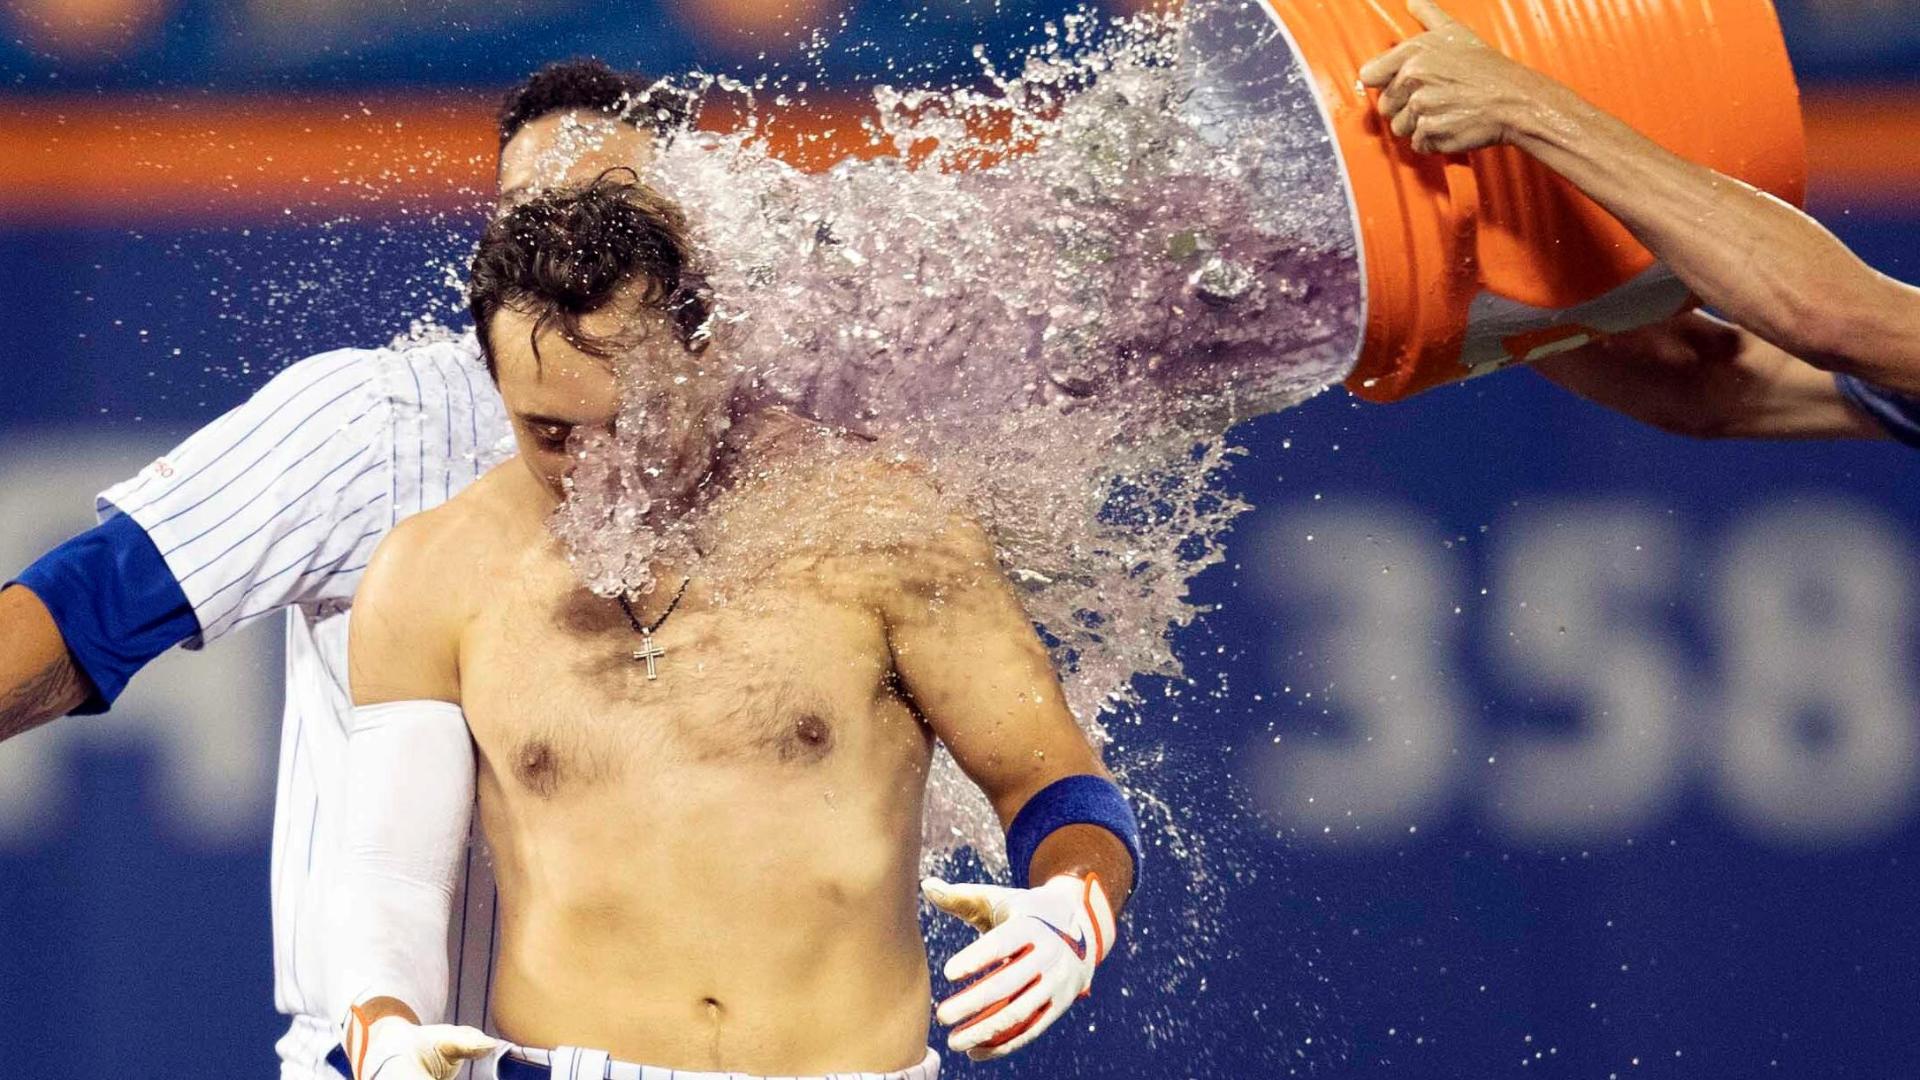 Conforto loses shirt as streaking Mets win 7th - ABC7 New York